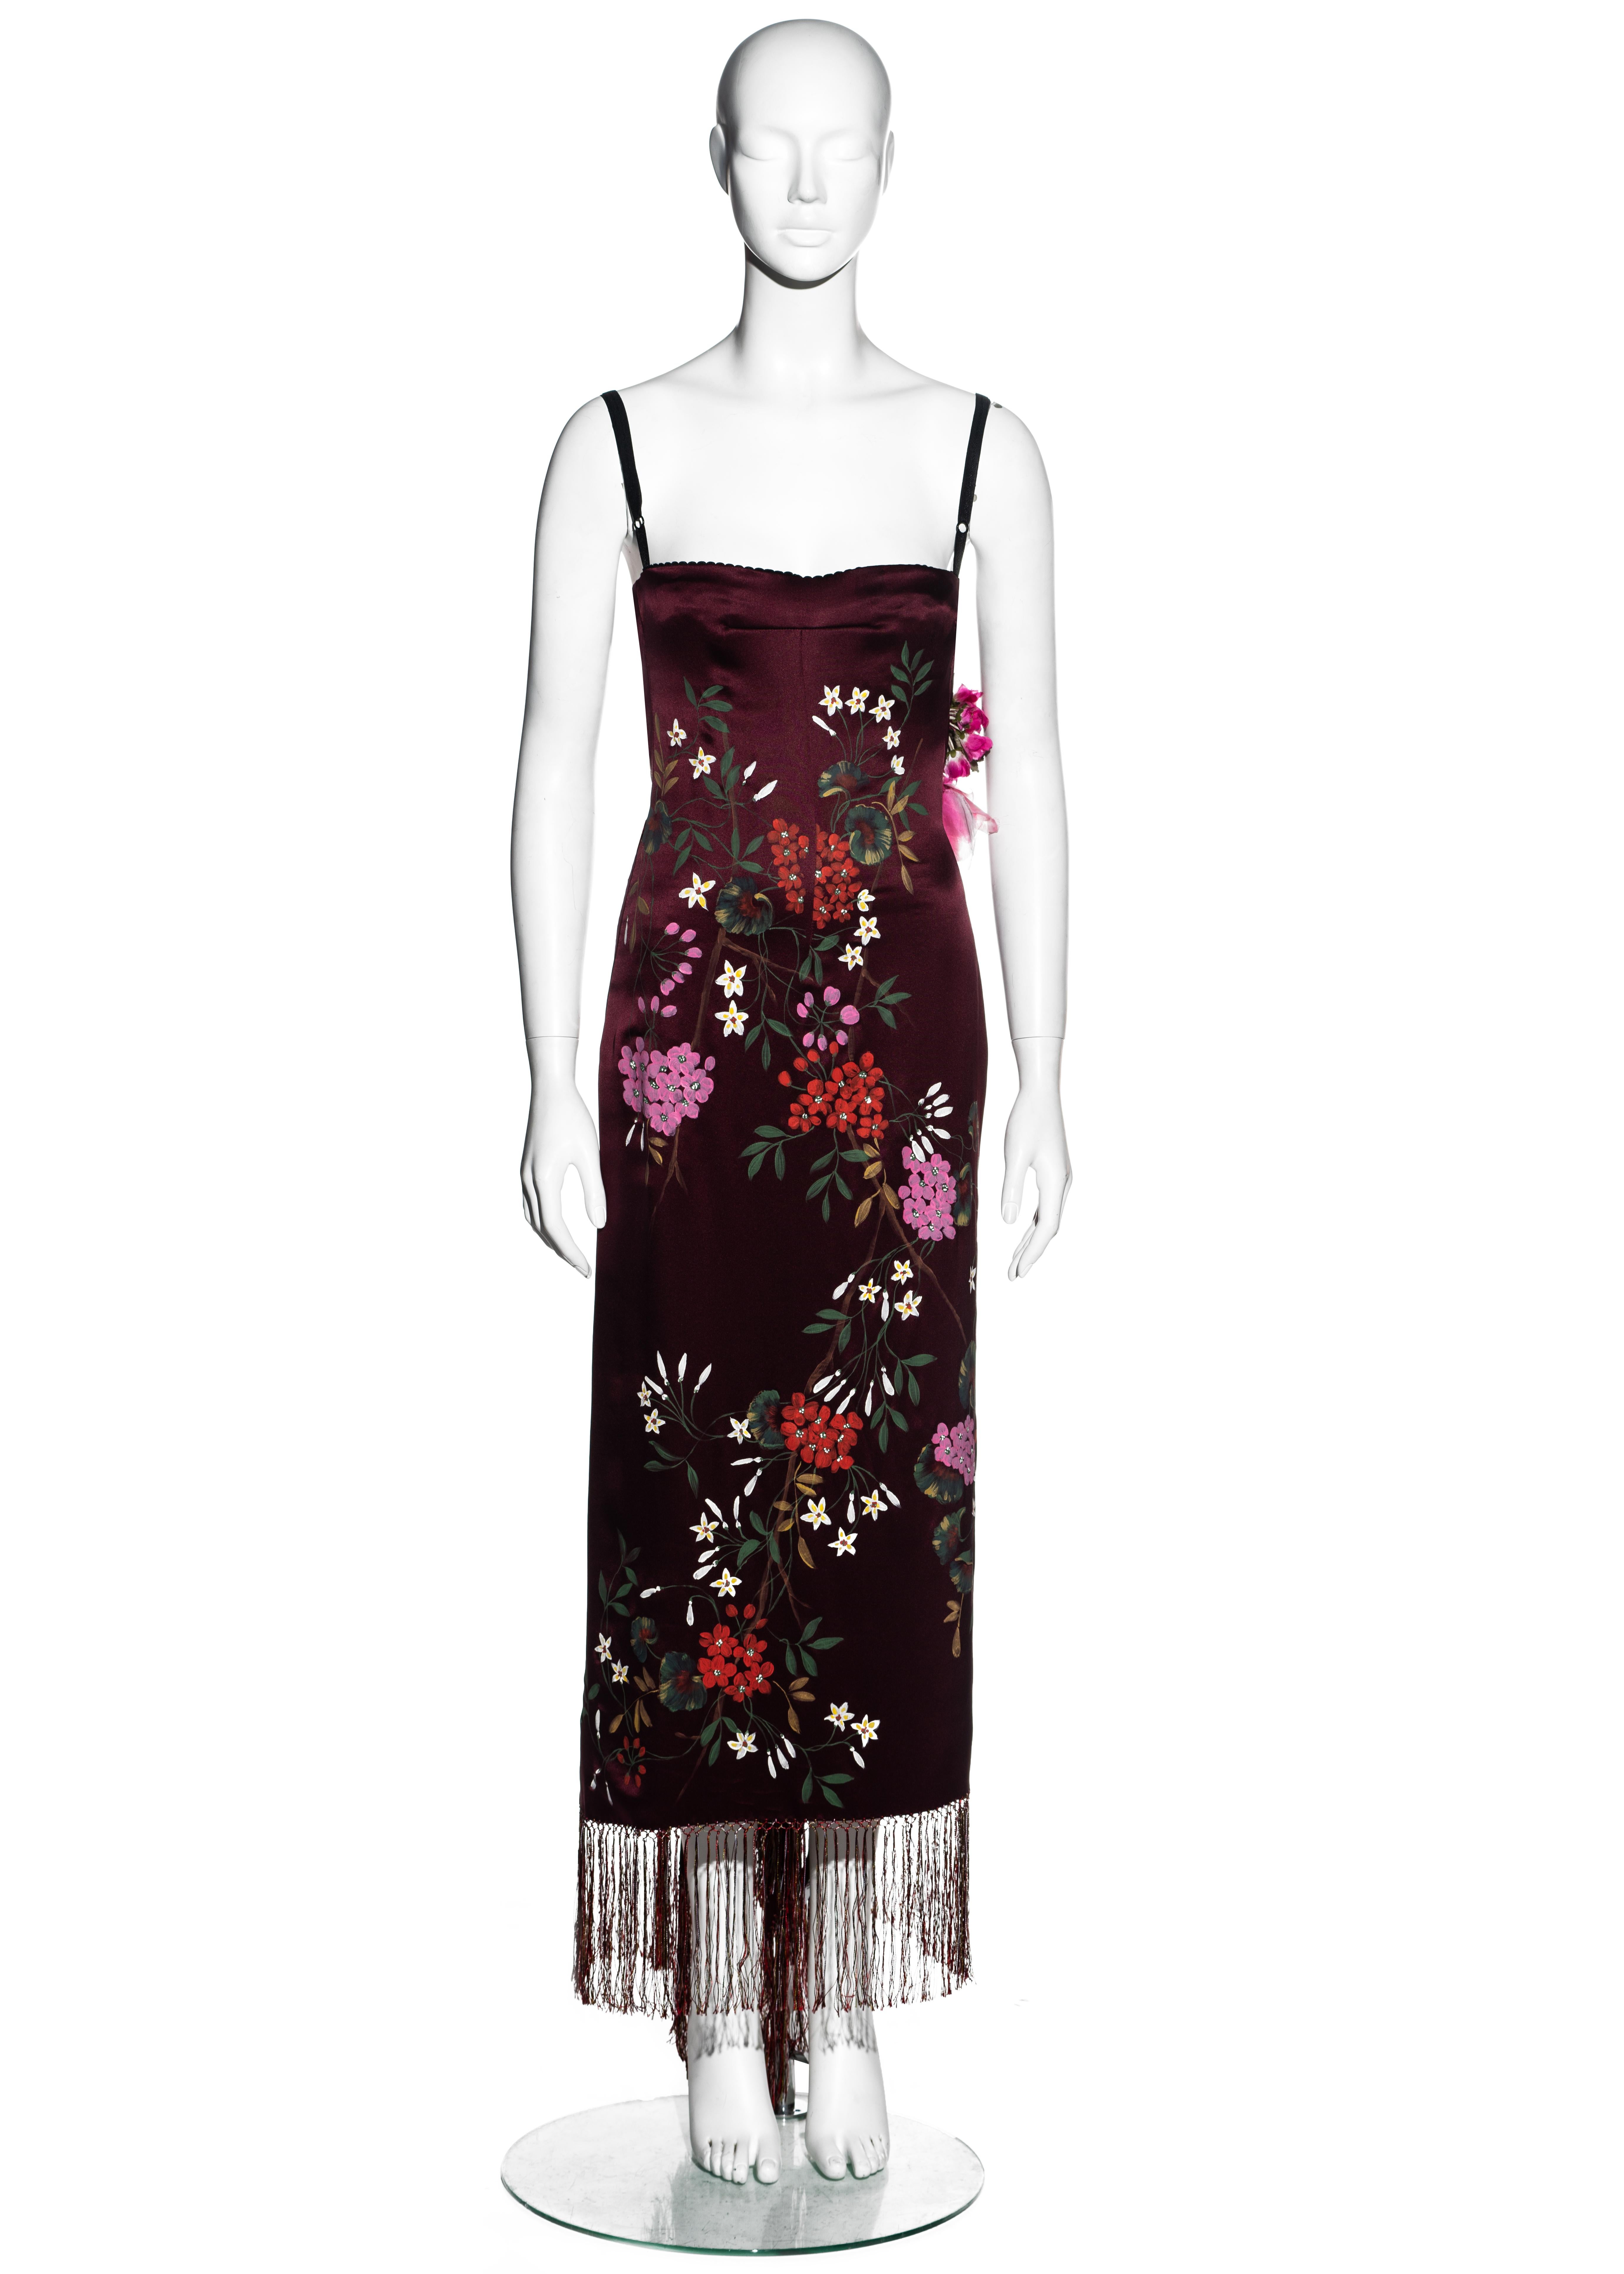 ▪ Dolce & Gabbana burgundy silk evening dress 
▪ Hand painted floral design unique to every piece 
▪ Built in corseted bodysuit 
▪ Organza and velvet floral appliqués applied at the back 
▪ Silk string trim at hem 
▪ Metal hook fastenings 
▪ Couture